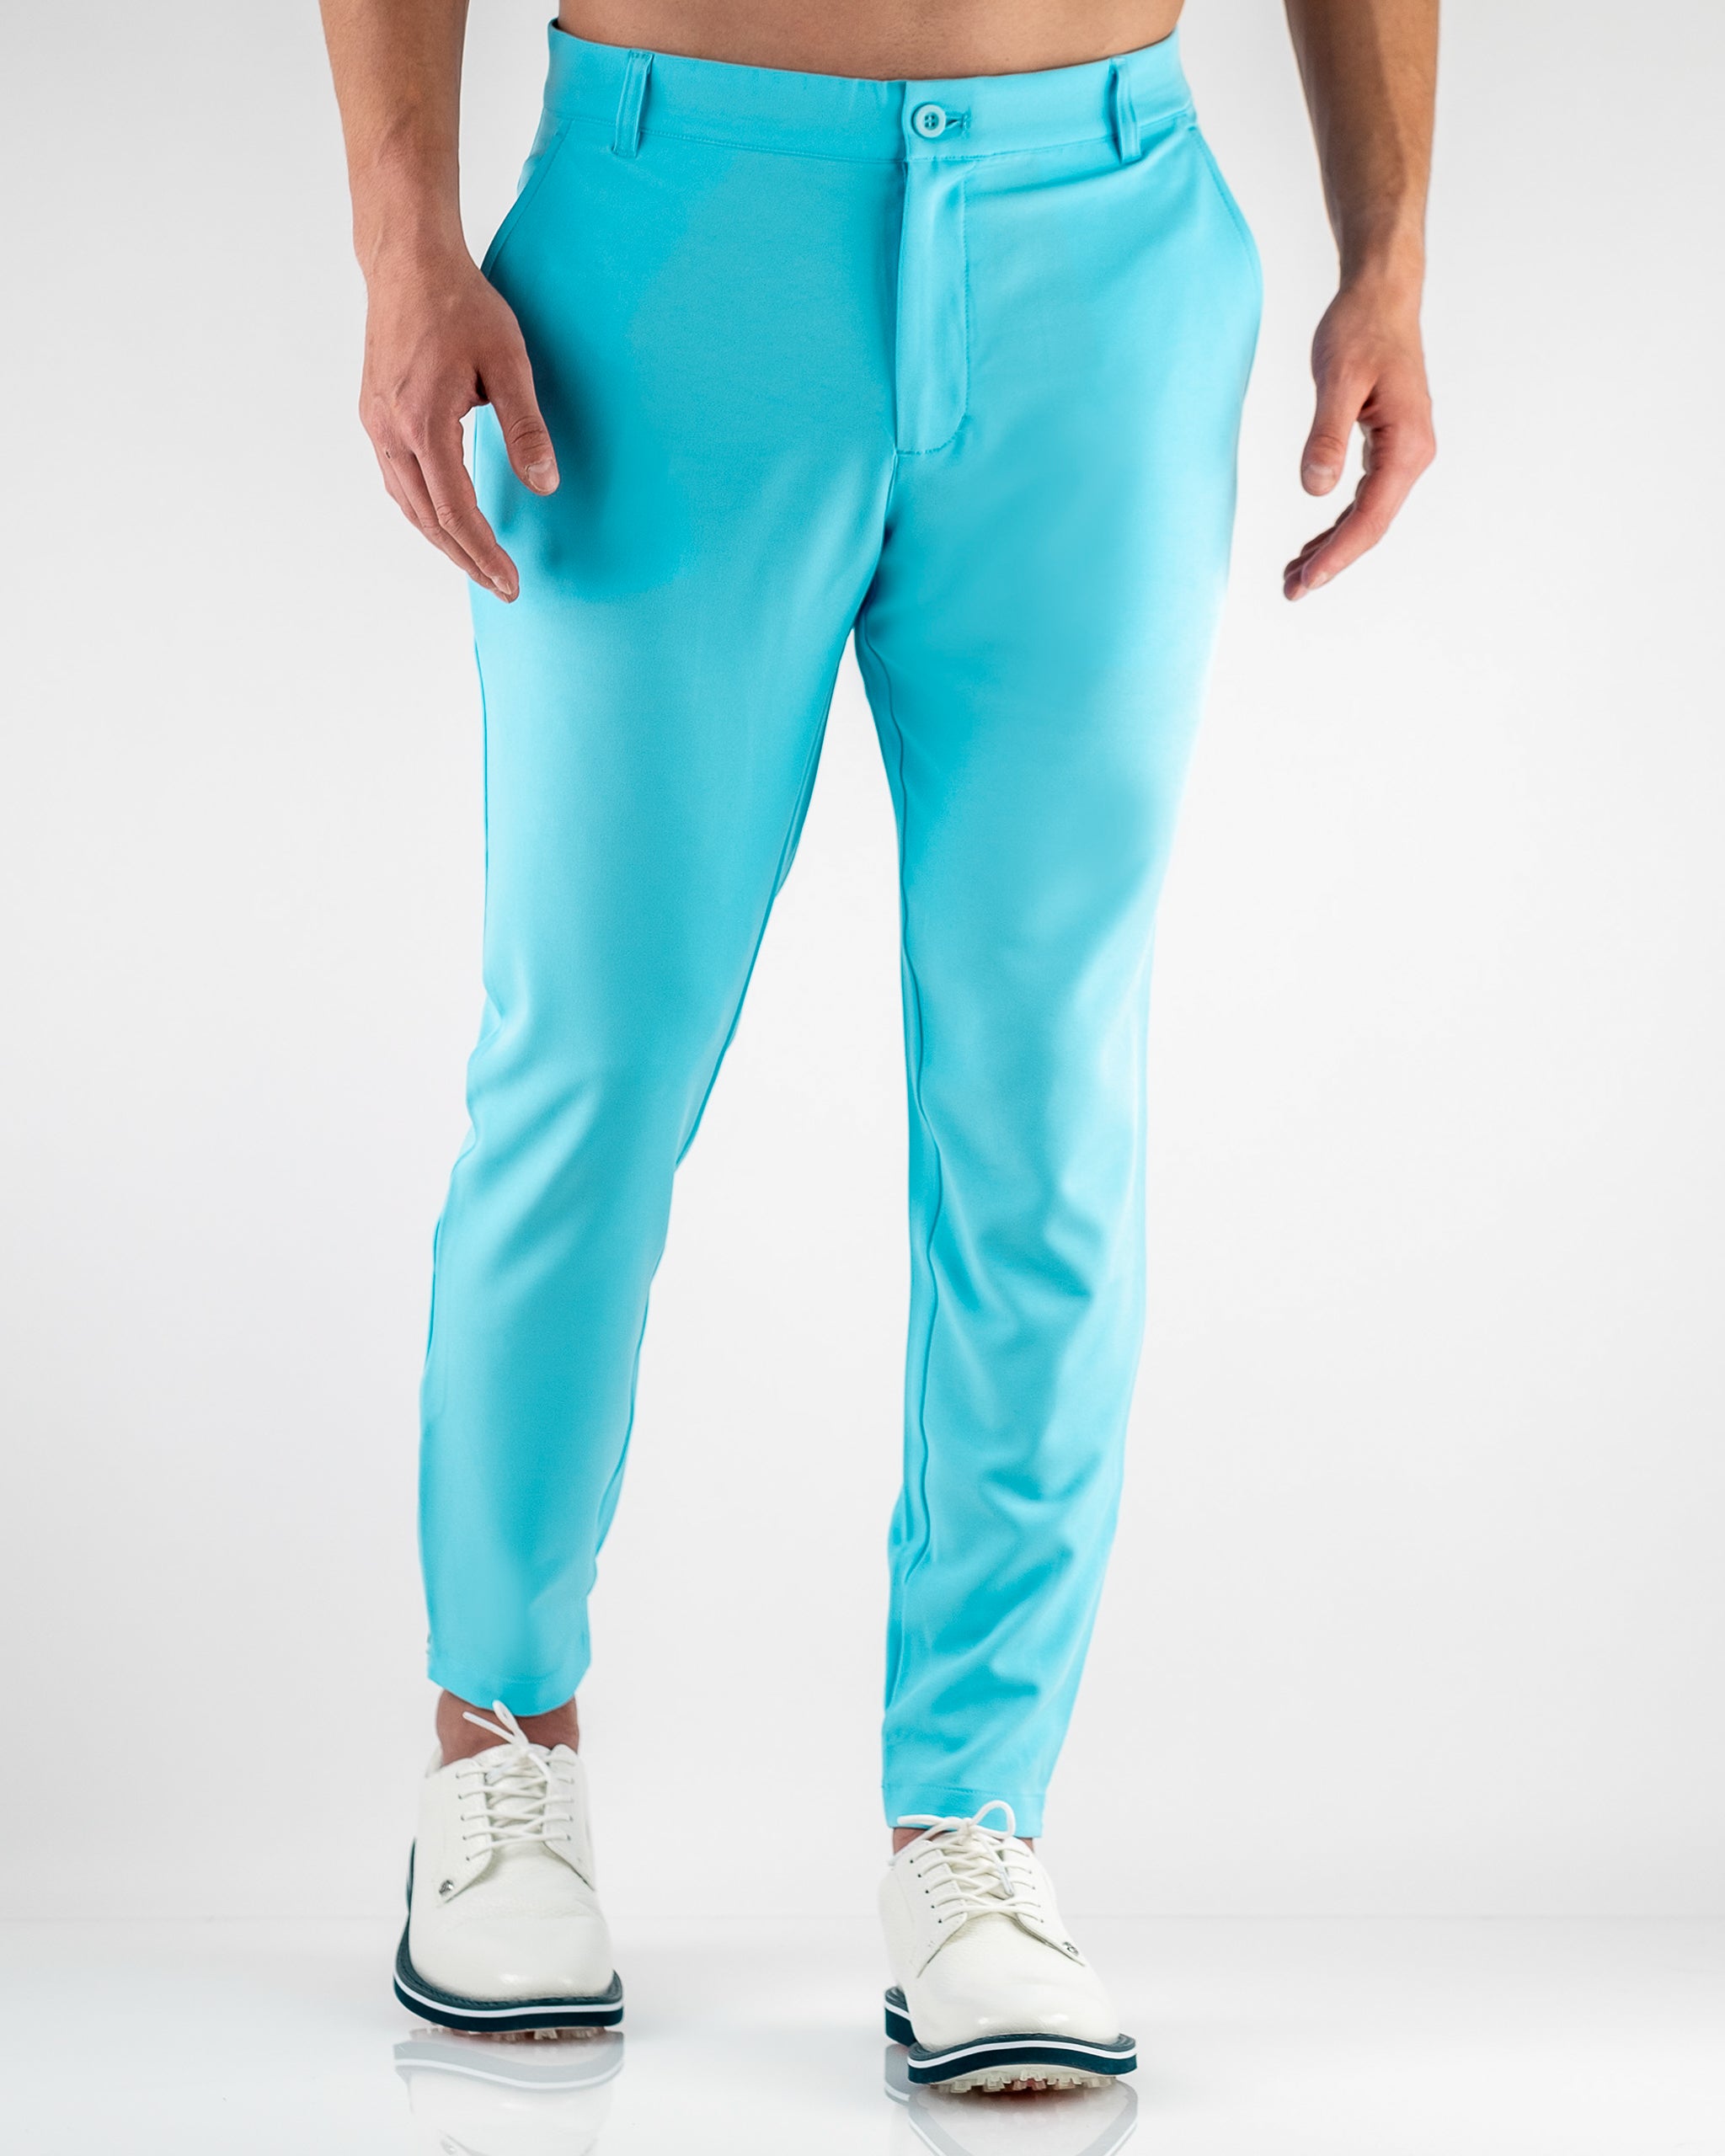 Performance Jogger - Baby Blue